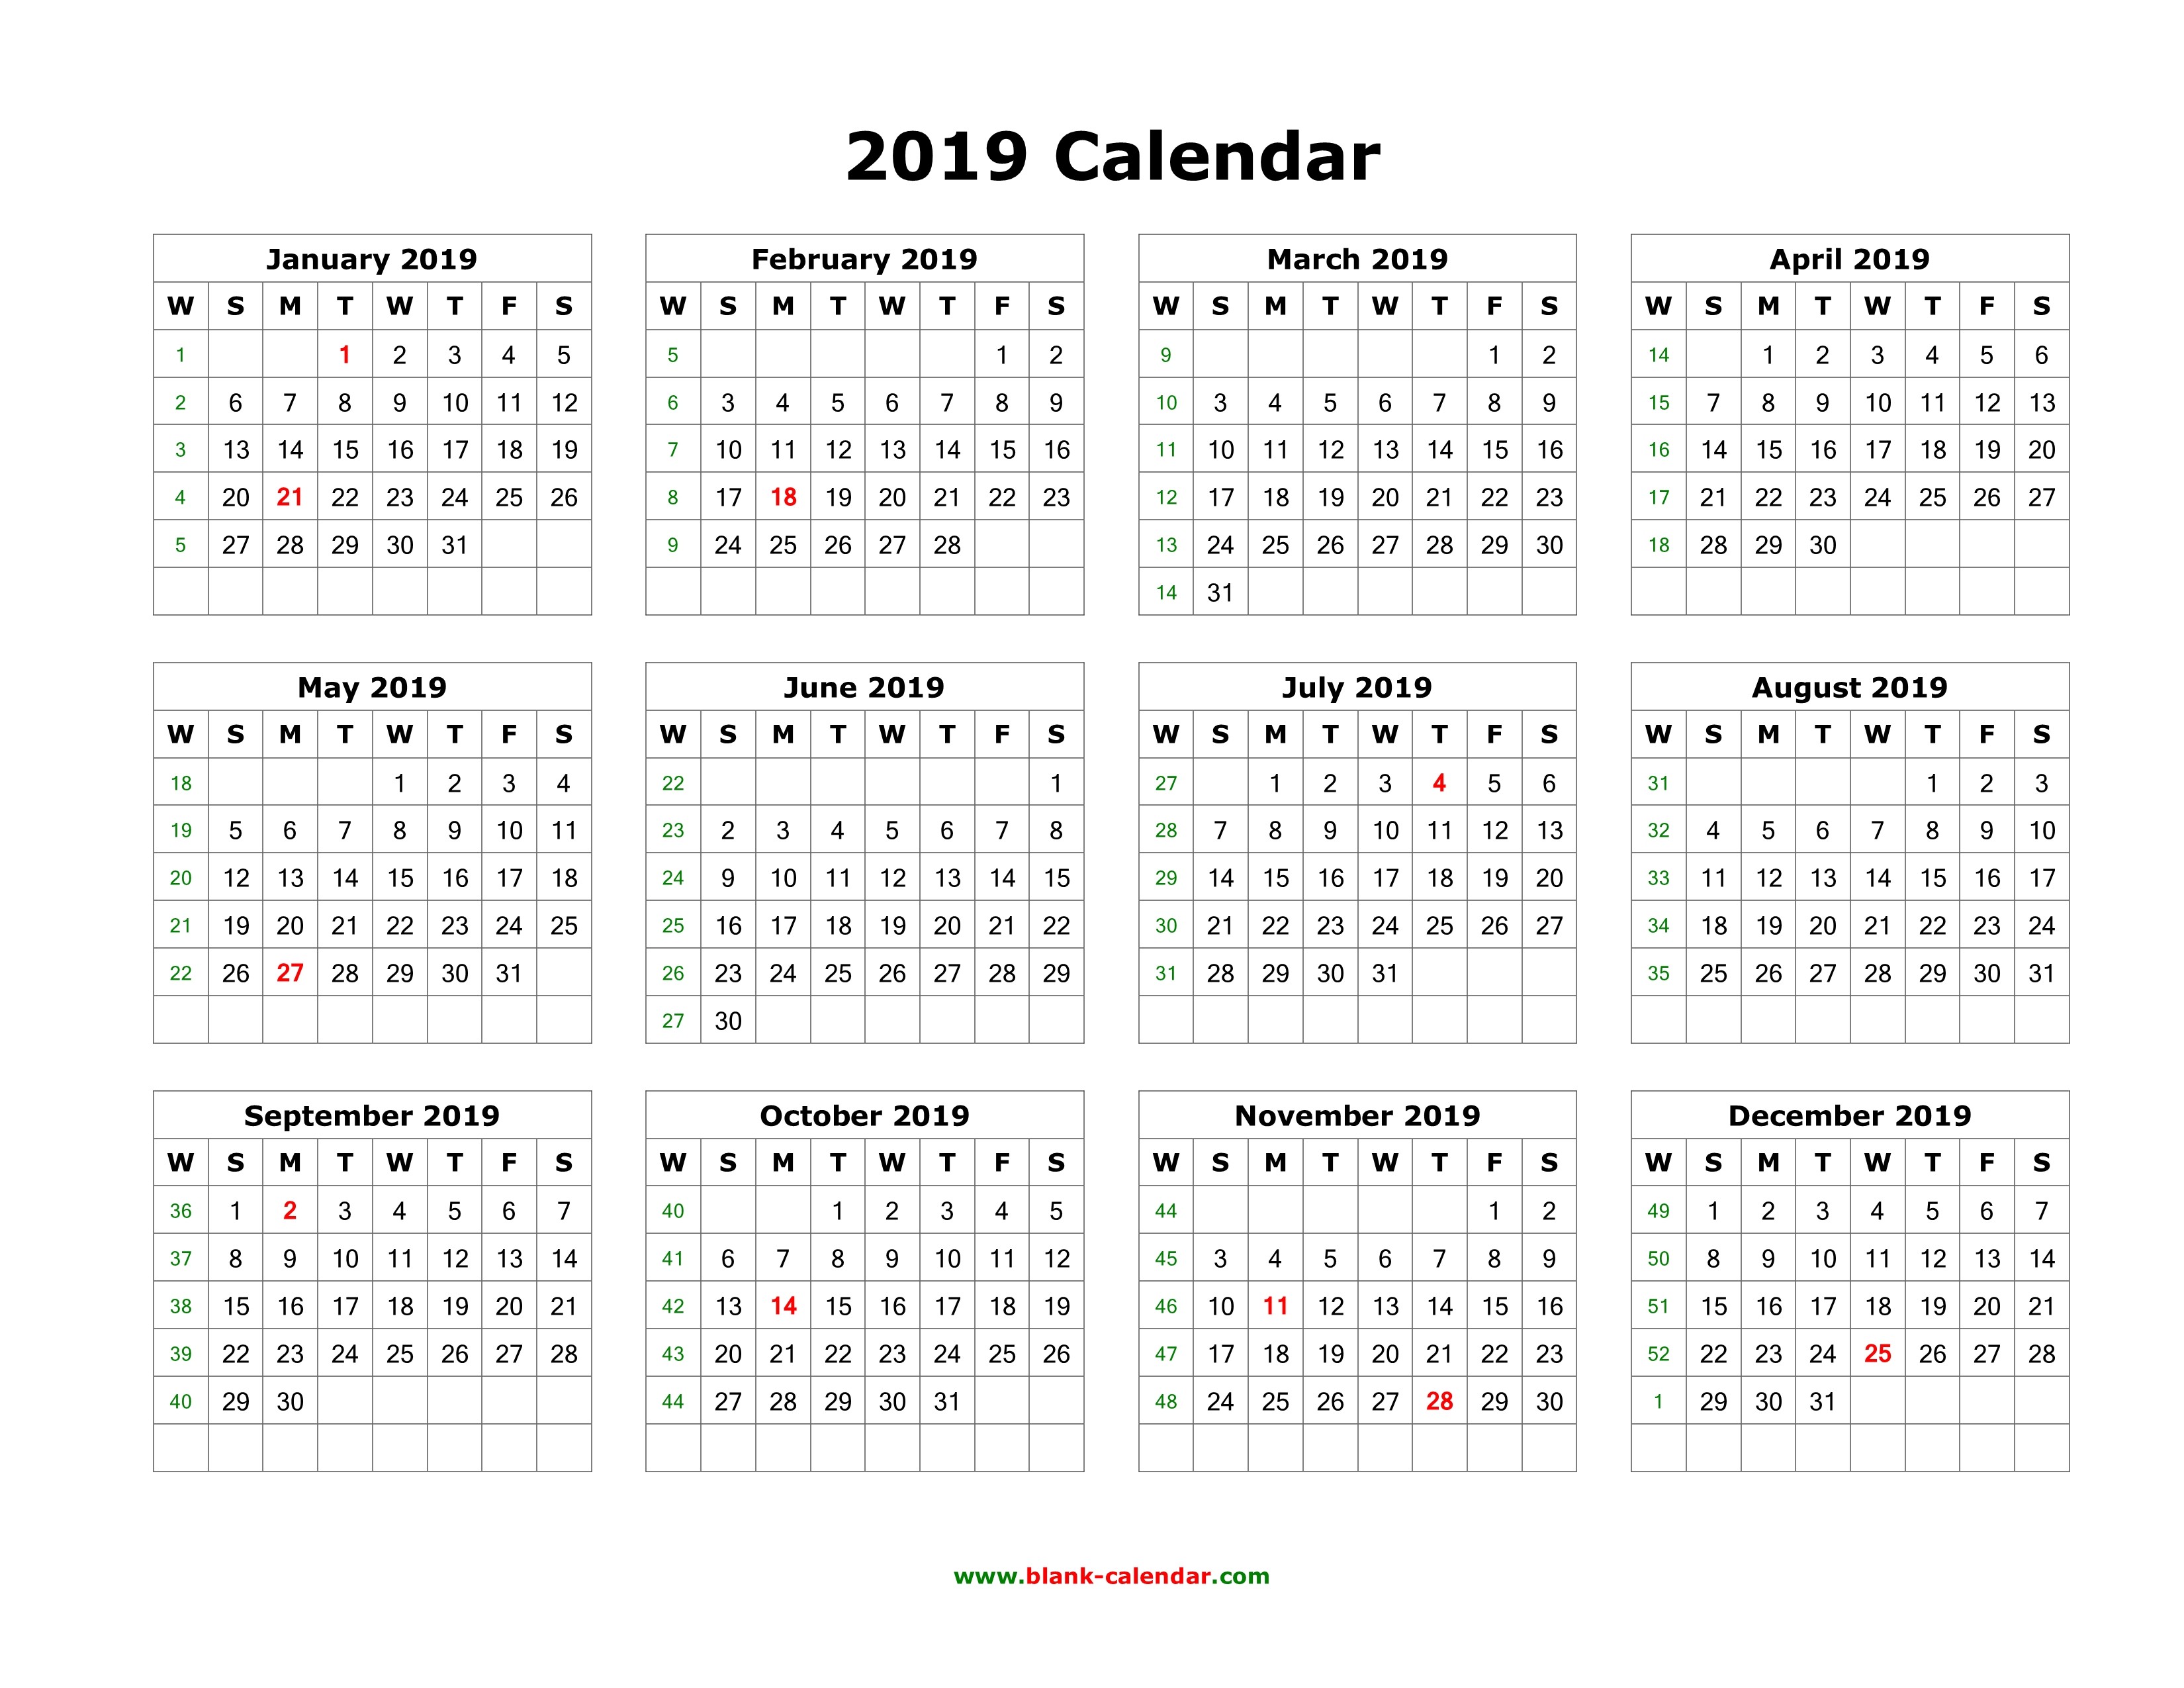 Download Blank Calendar 2019 12 months on one page